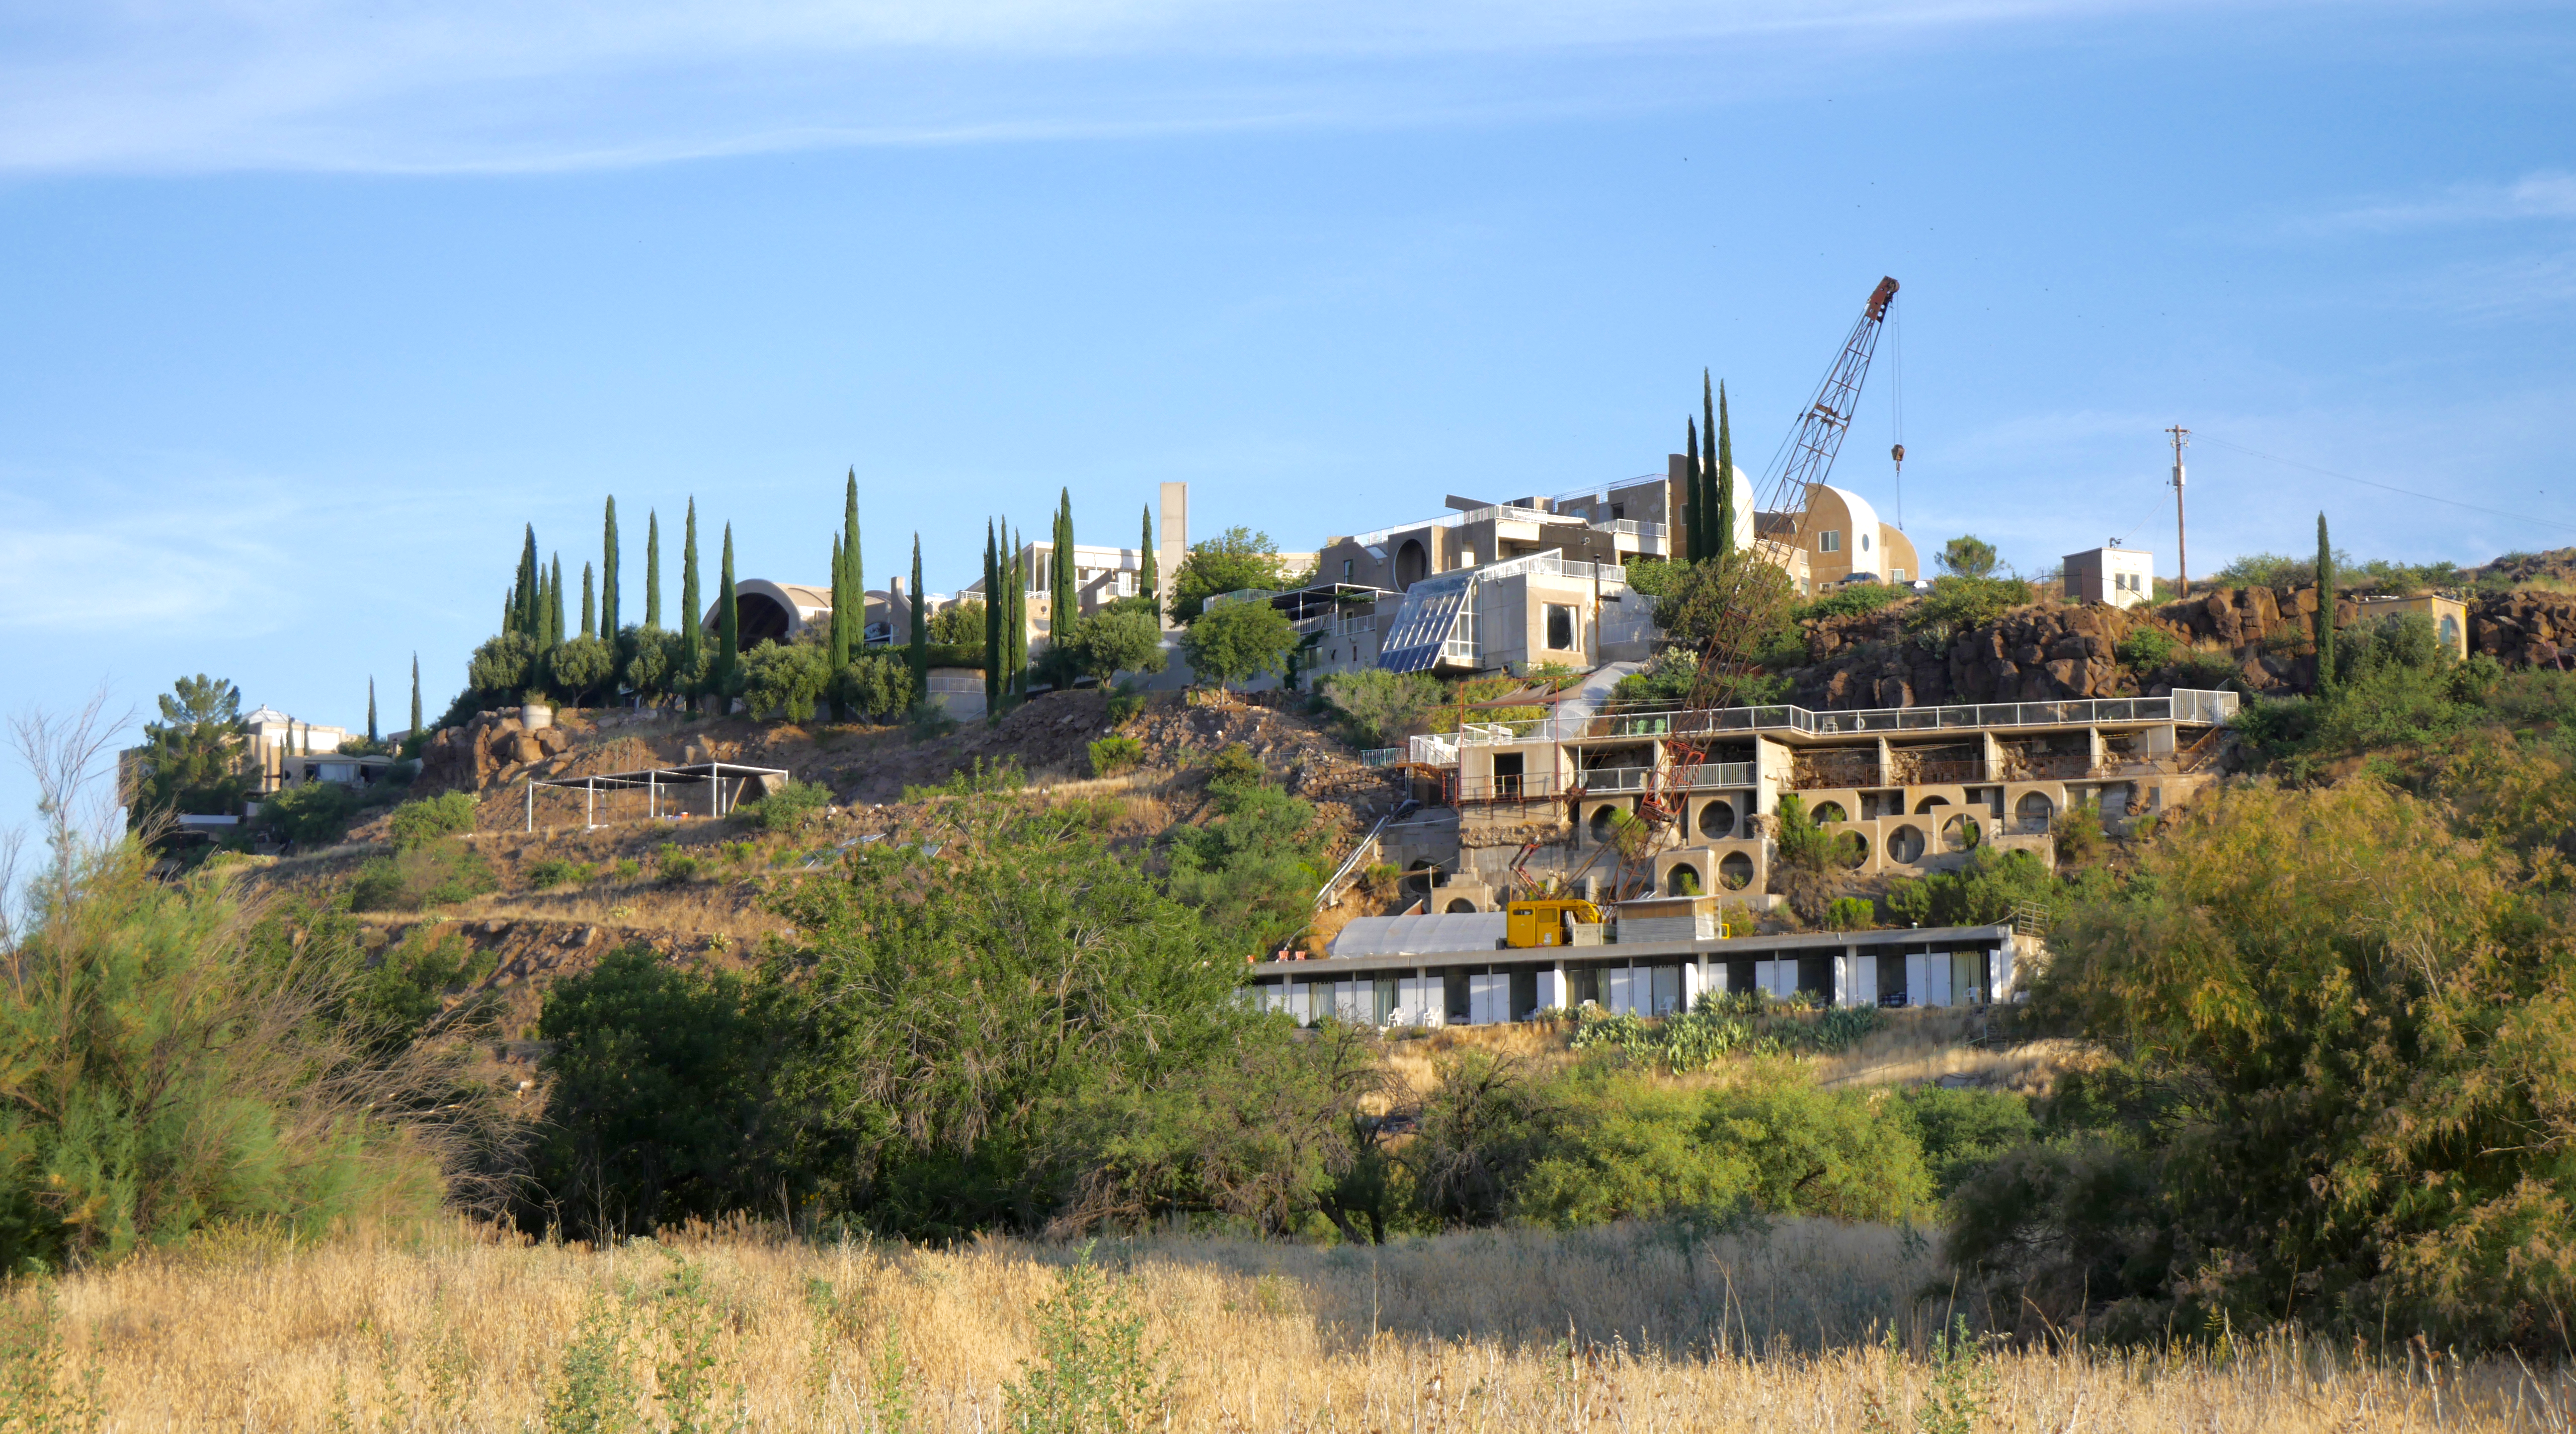 A view of the cliffs at Arcosanti in 2017. Credit: By Carwil - Own work, CC BY-SA 4.0, https://commons.wikimedia.org/w/index.php?curid=60360895